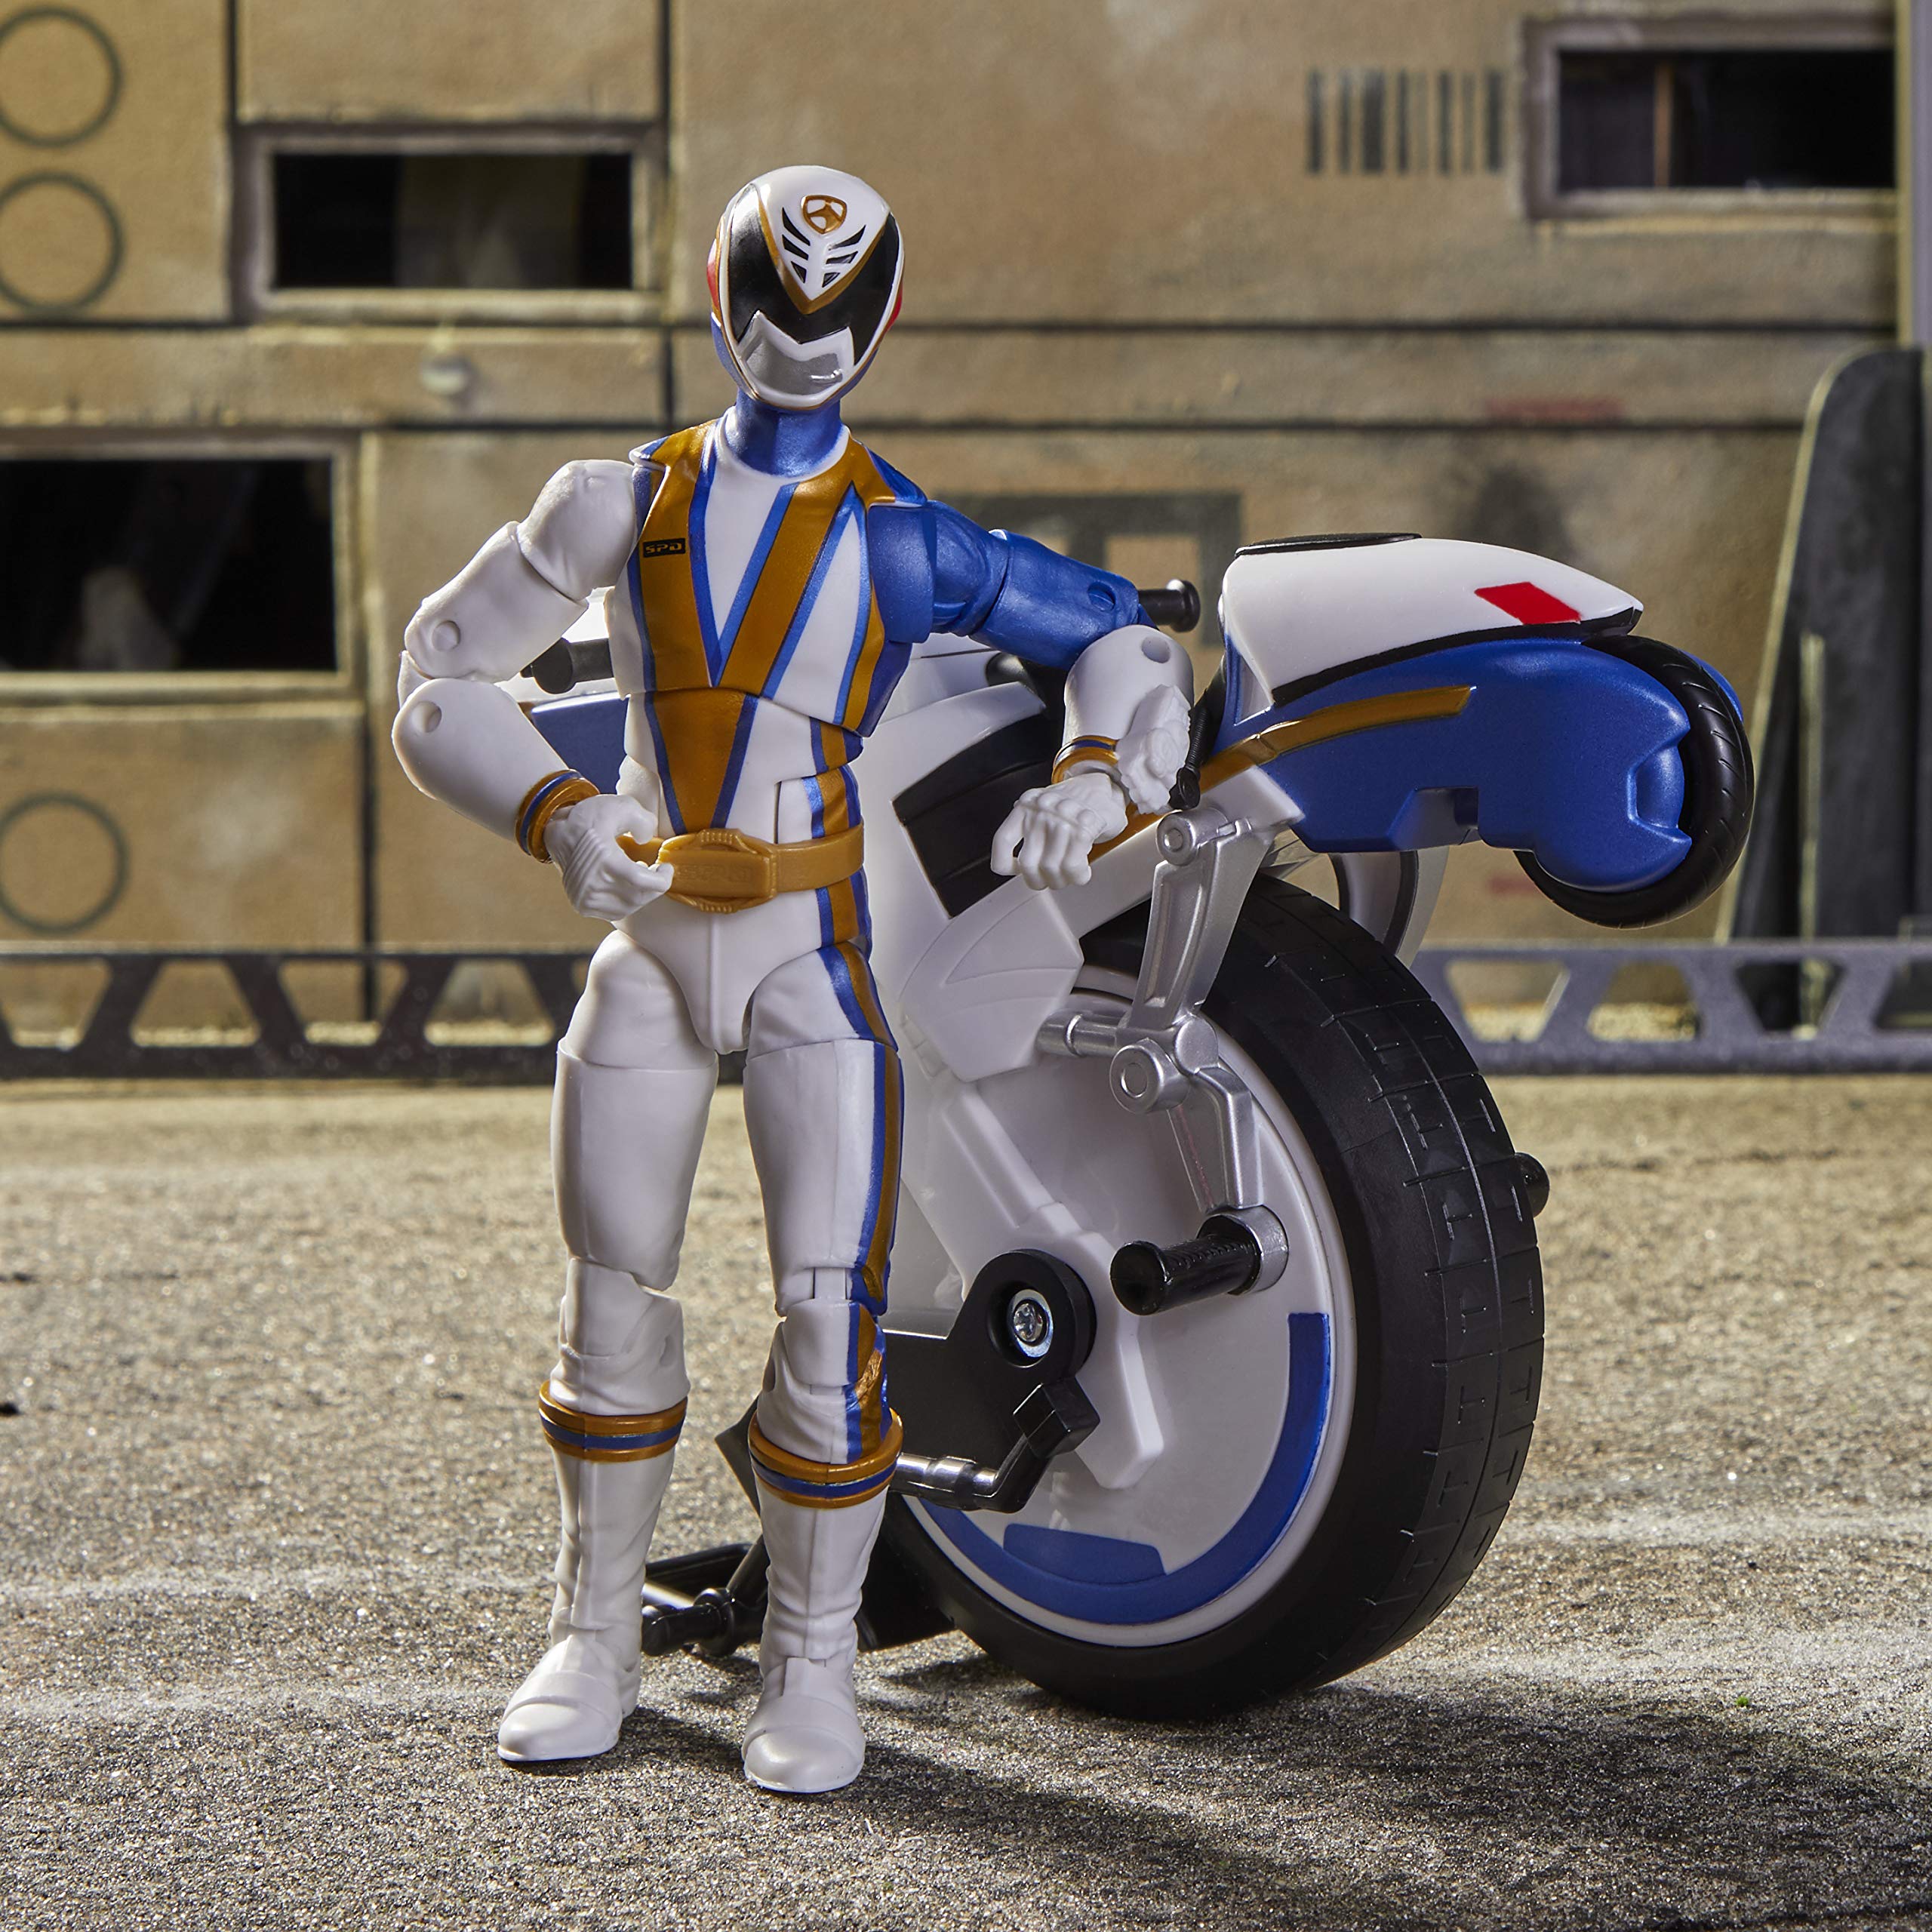 Power Rangers Lightning Collection S.P.D. Omega Ranger and Uniforce Cycle Vehicle 6-Inch Collectible Figure Toy (Amazon Exclusive)